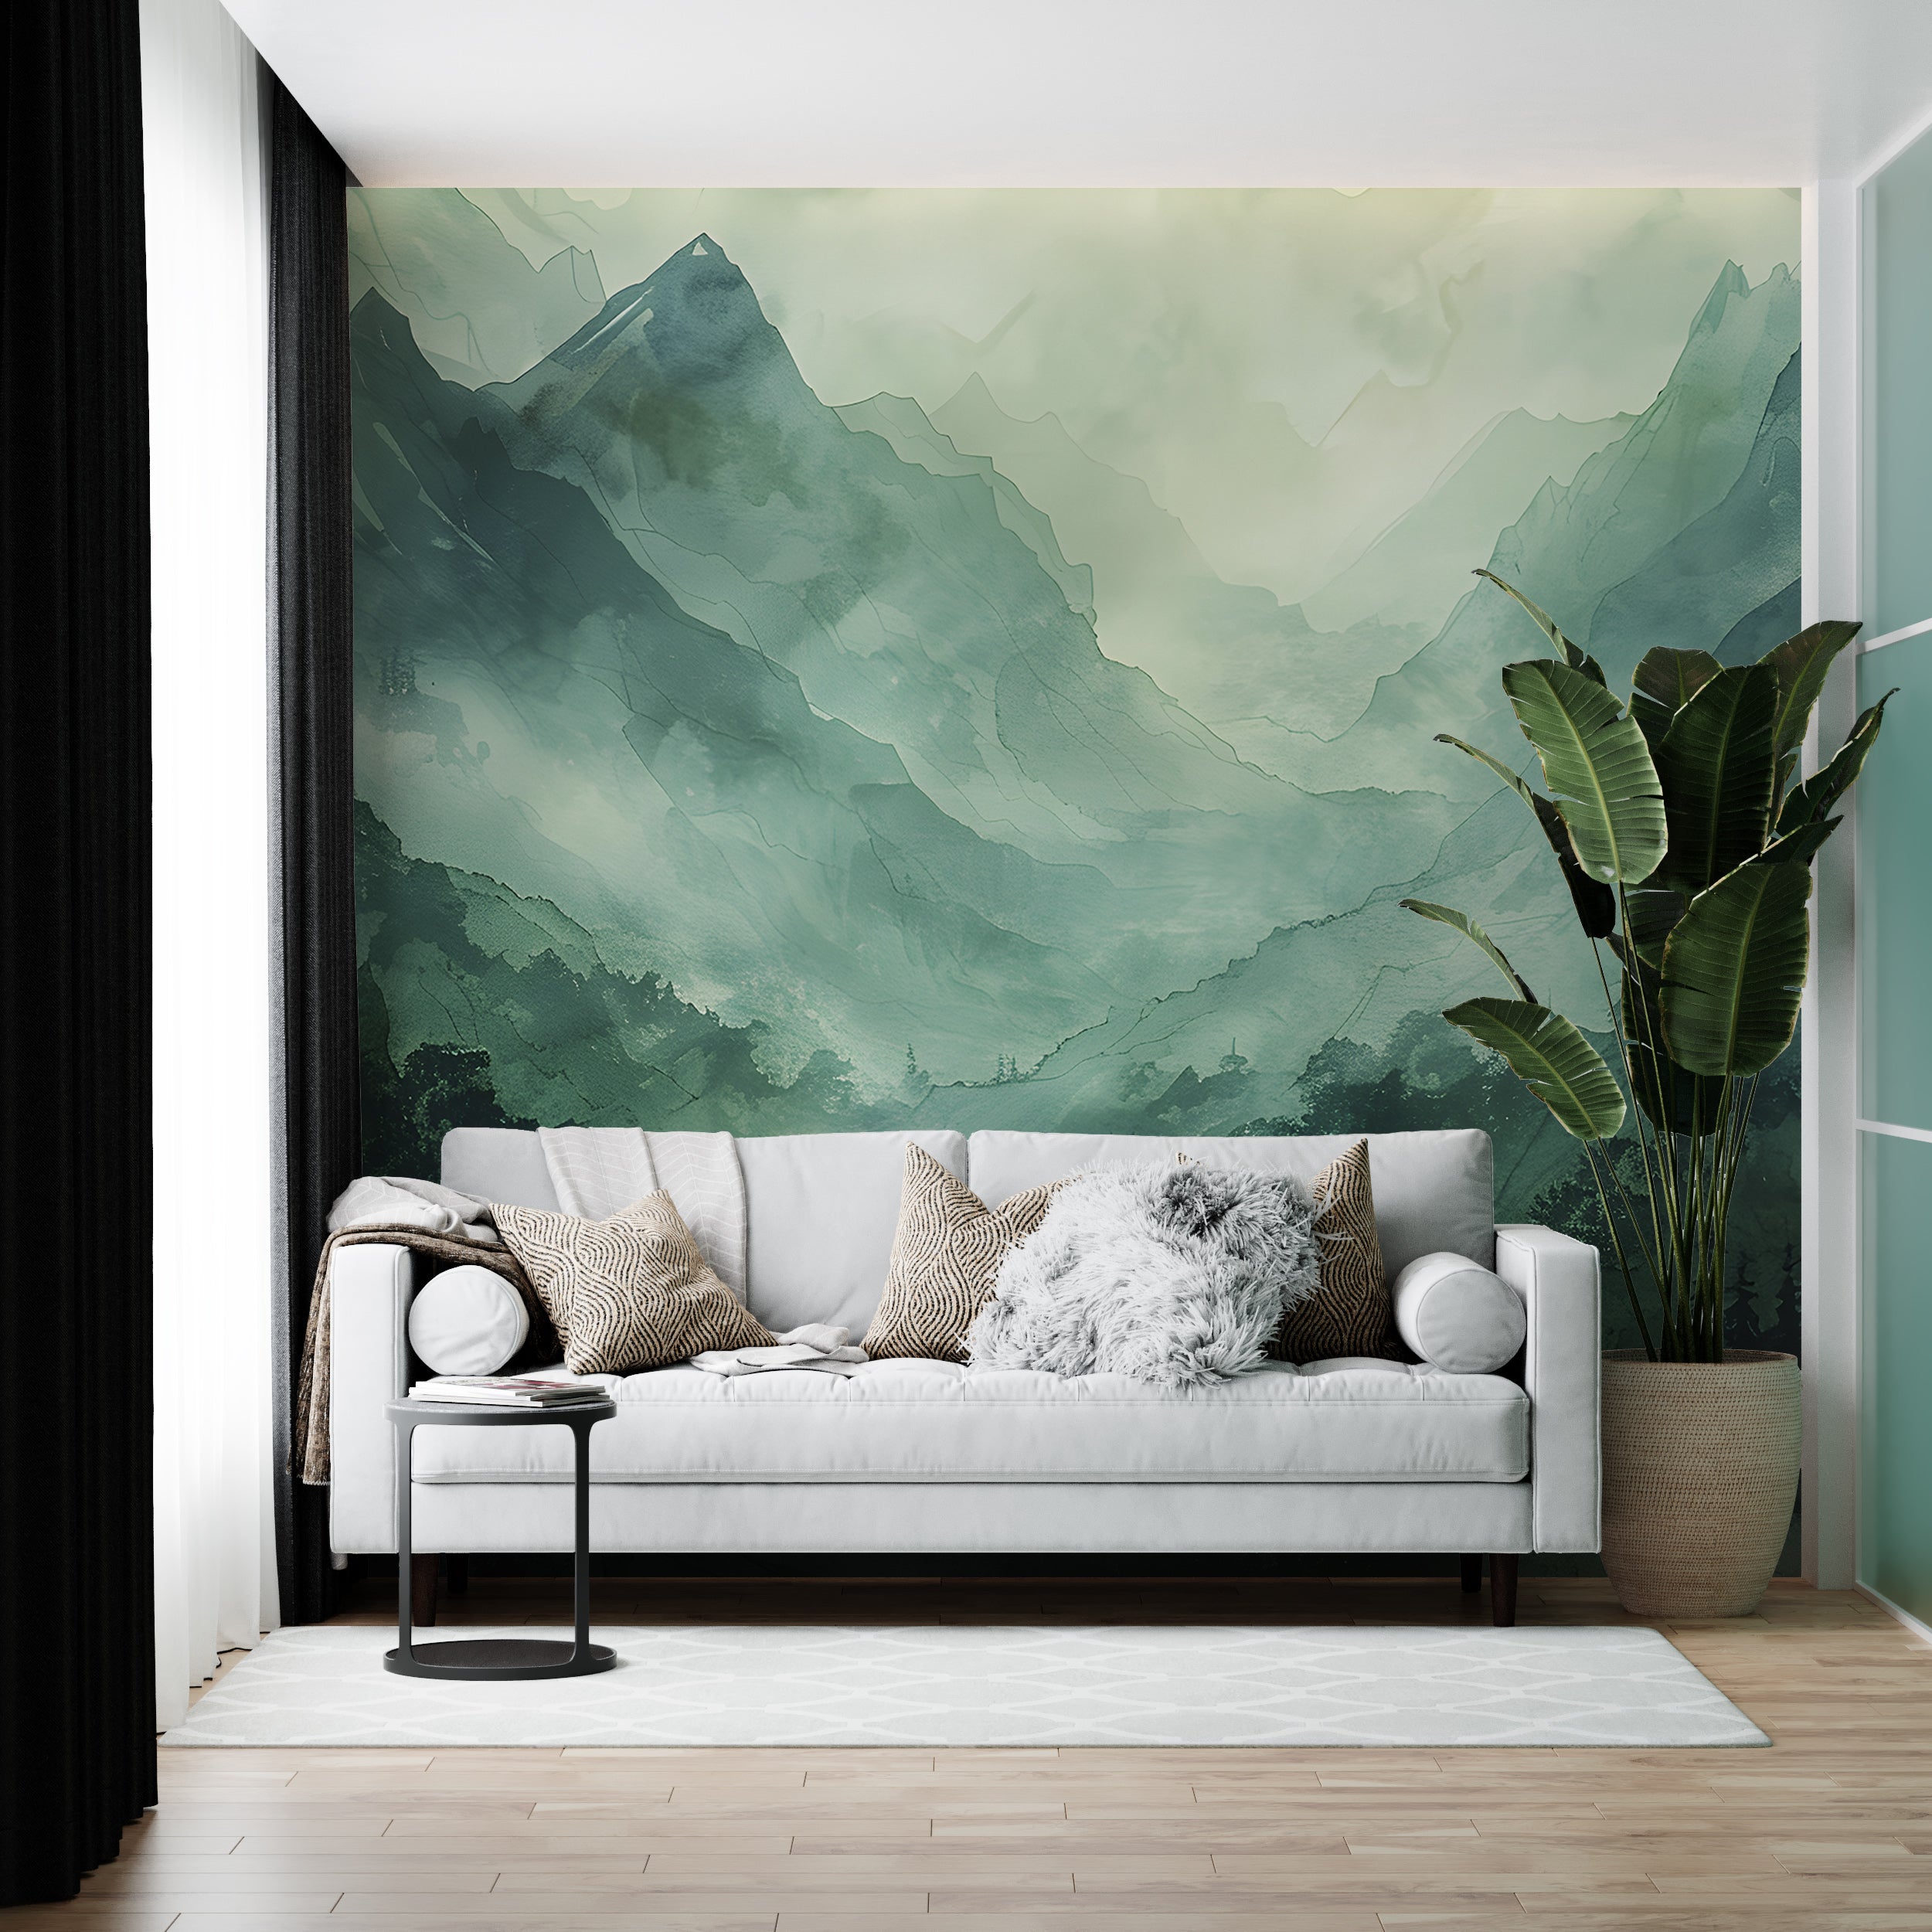 Watercolor Green Mountains Mural, Abstract Mountain Landscape Wallpaper, Peel and Stick Foggy Forest Art, Emerald Color Wild Nature Decor